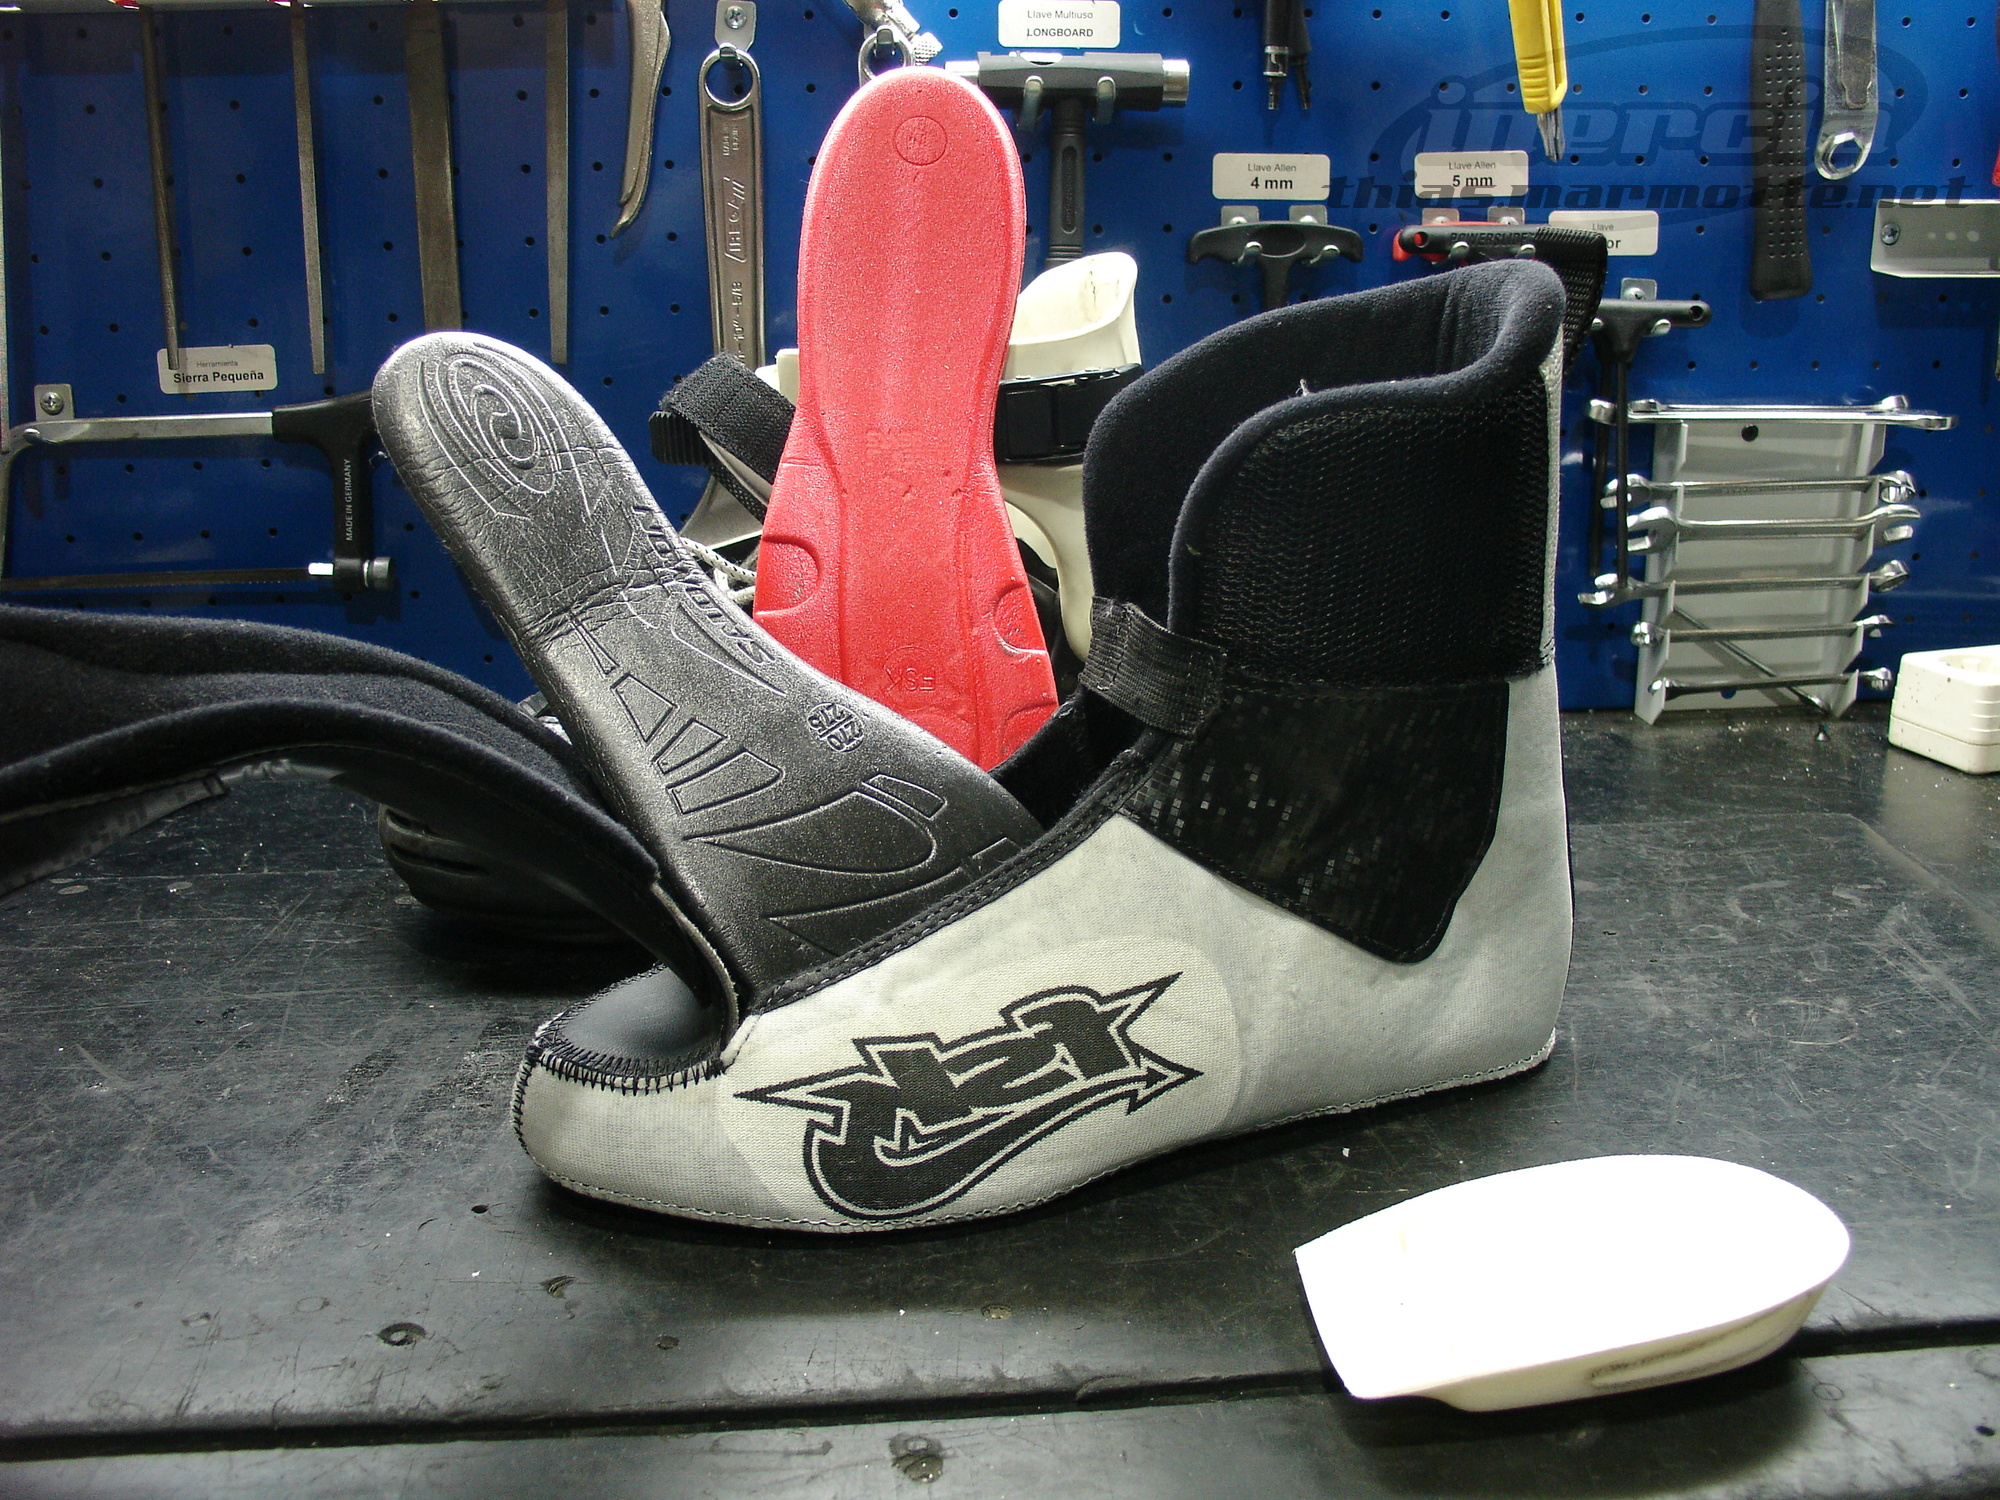 Liner, inner and outer soles and shock absorber